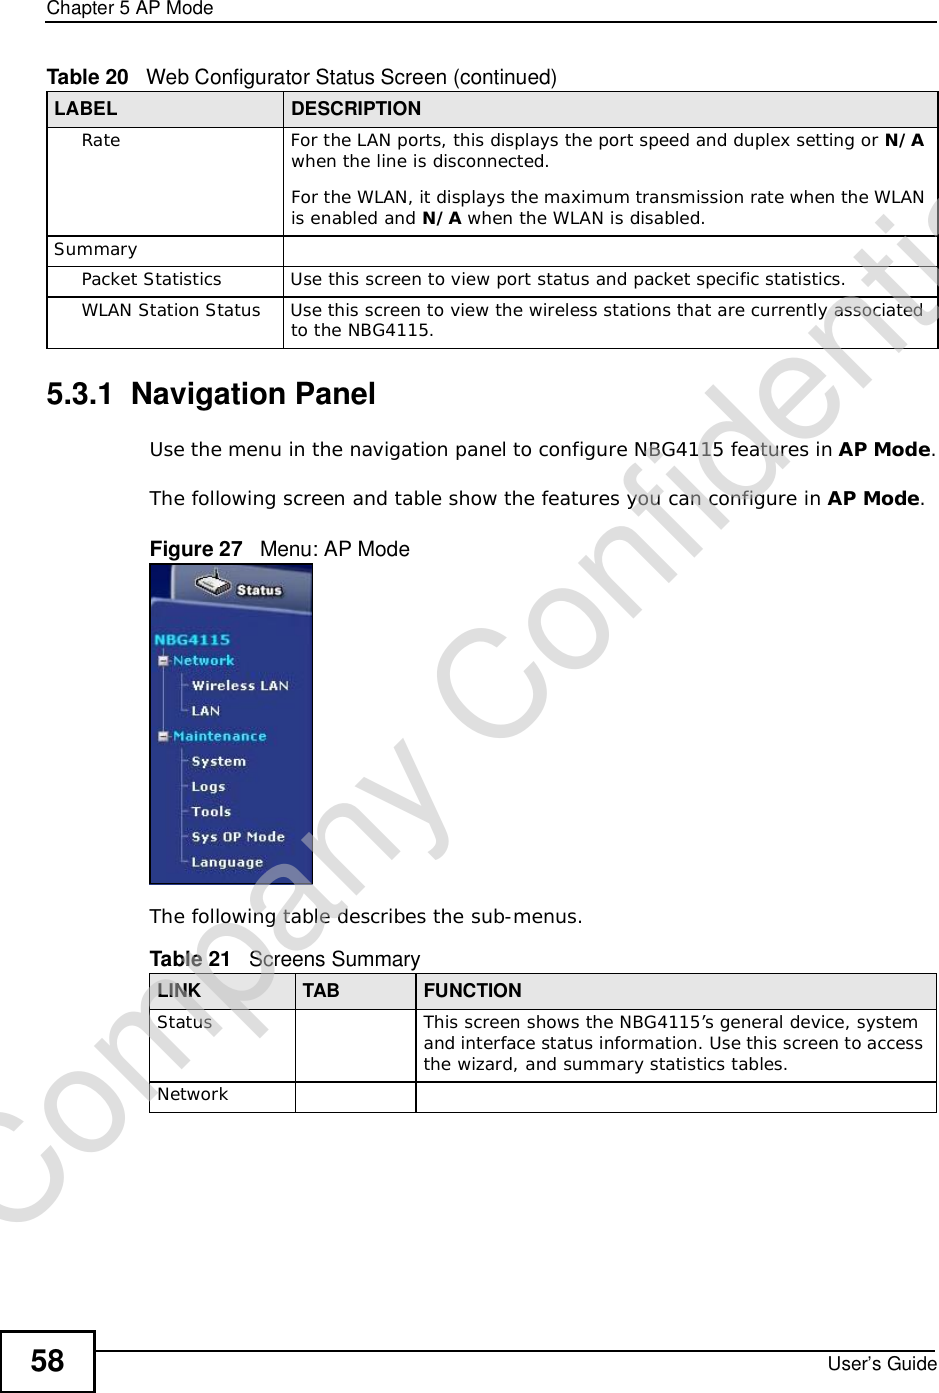 Chapter 5AP ModeUser’s Guide585.3.1  Navigation PanelUse the menu in the navigation panel to configure NBG4115 features in AP Mode.The following screen and table show the features you can configure in AP Mode.Figure 27   Menu: AP ModeThe following table describes the sub-menus.RateFor the LAN ports, this displays the port speed and duplex setting or N/Awhen the line is disconnected.For the WLAN, it displays the maximum transmission rate when the WLAN is enabled and N/A when the WLAN is disabled.SummaryPacket StatisticsUse this screen to view port status and packet specific statistics.WLAN Station StatusUse this screen to view the wireless stations that are currently associated to the NBG4115.Table 20   Web Configurator Status Screen (continued)LABEL DESCRIPTIONTable 21   Screens SummaryLINK TAB FUNCTIONStatus This screen shows the NBG4115’s general device, system and interface status information. Use this screen to access the wizard, and summary statistics tables.NetworkCompany Confidential